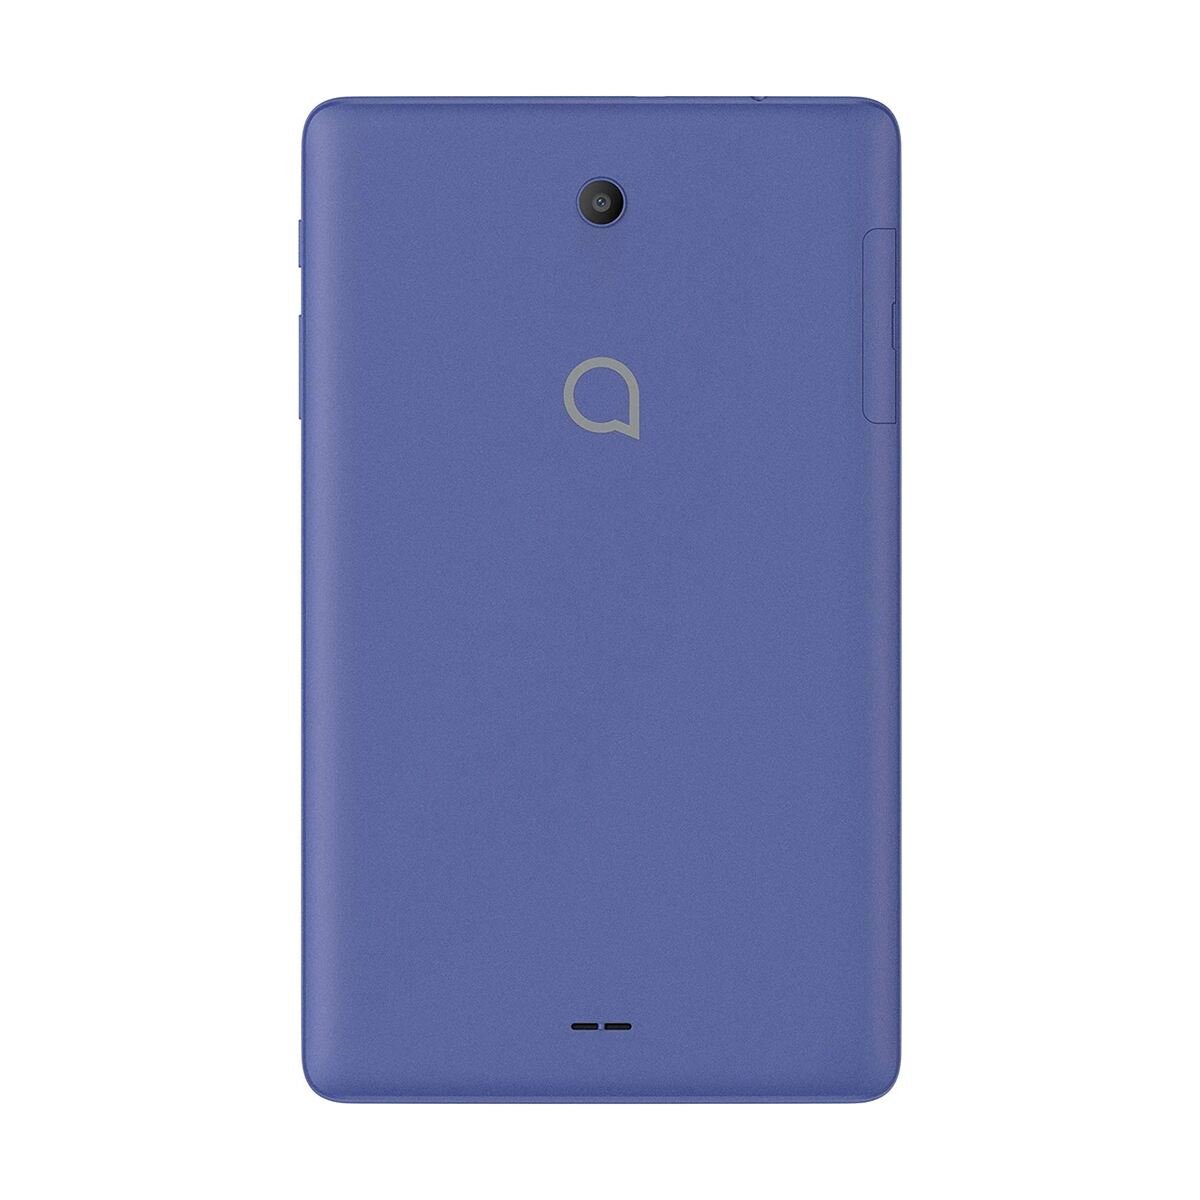 Alcatel Tablet 3T 8, Quad-Core, 3GB RAM, 32GB Memory, 8.0" Display, Android Oreo, 4G, Suede Blue